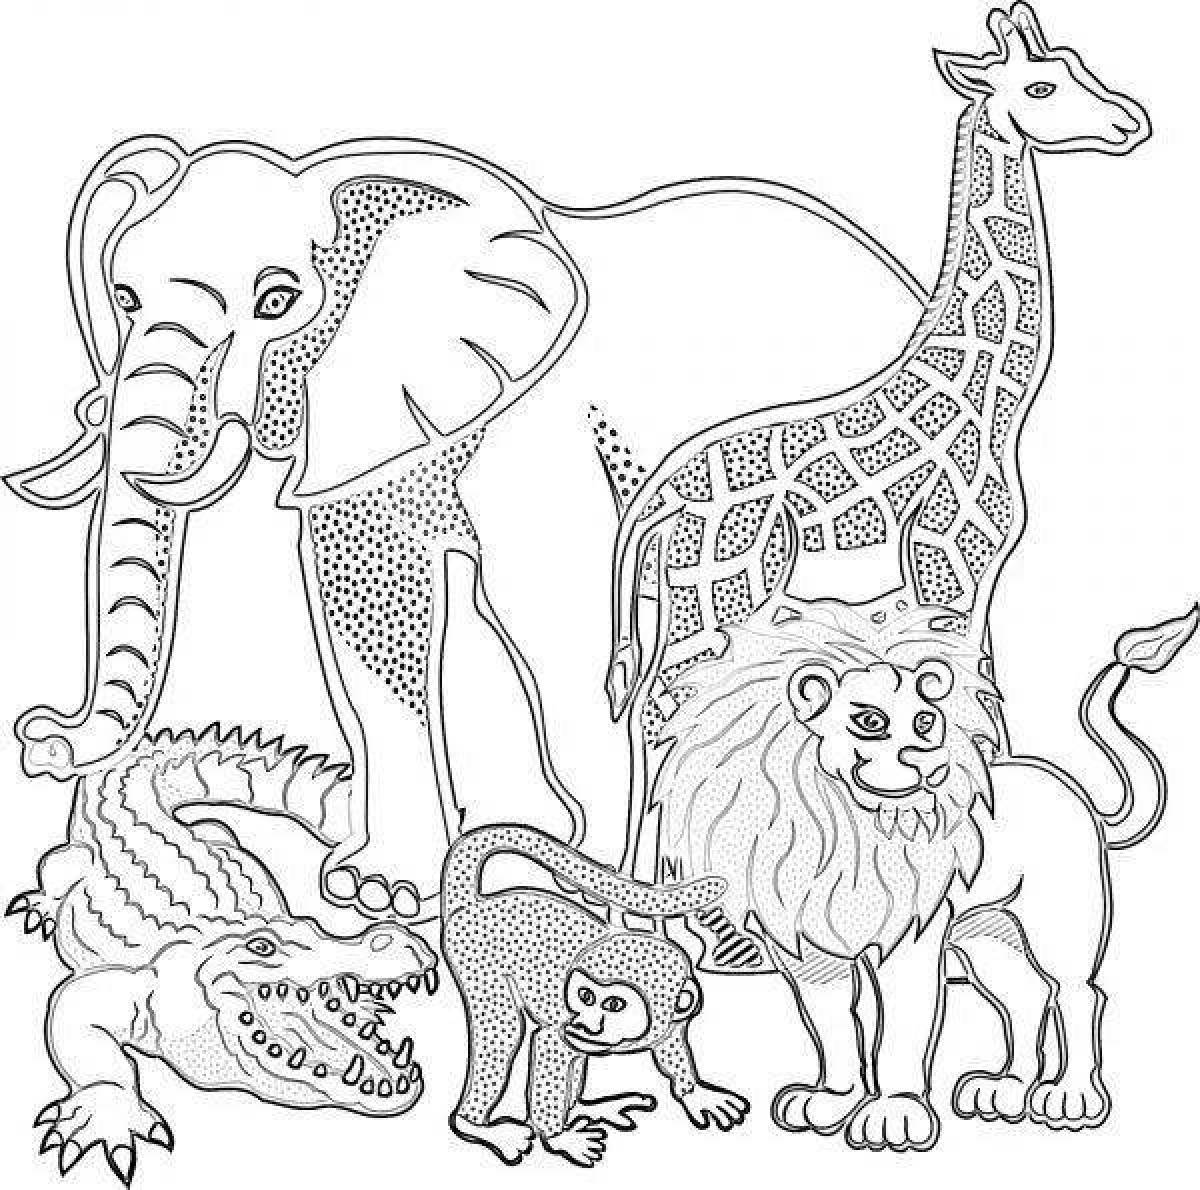 Great African animal coloring book for 6-7 year olds